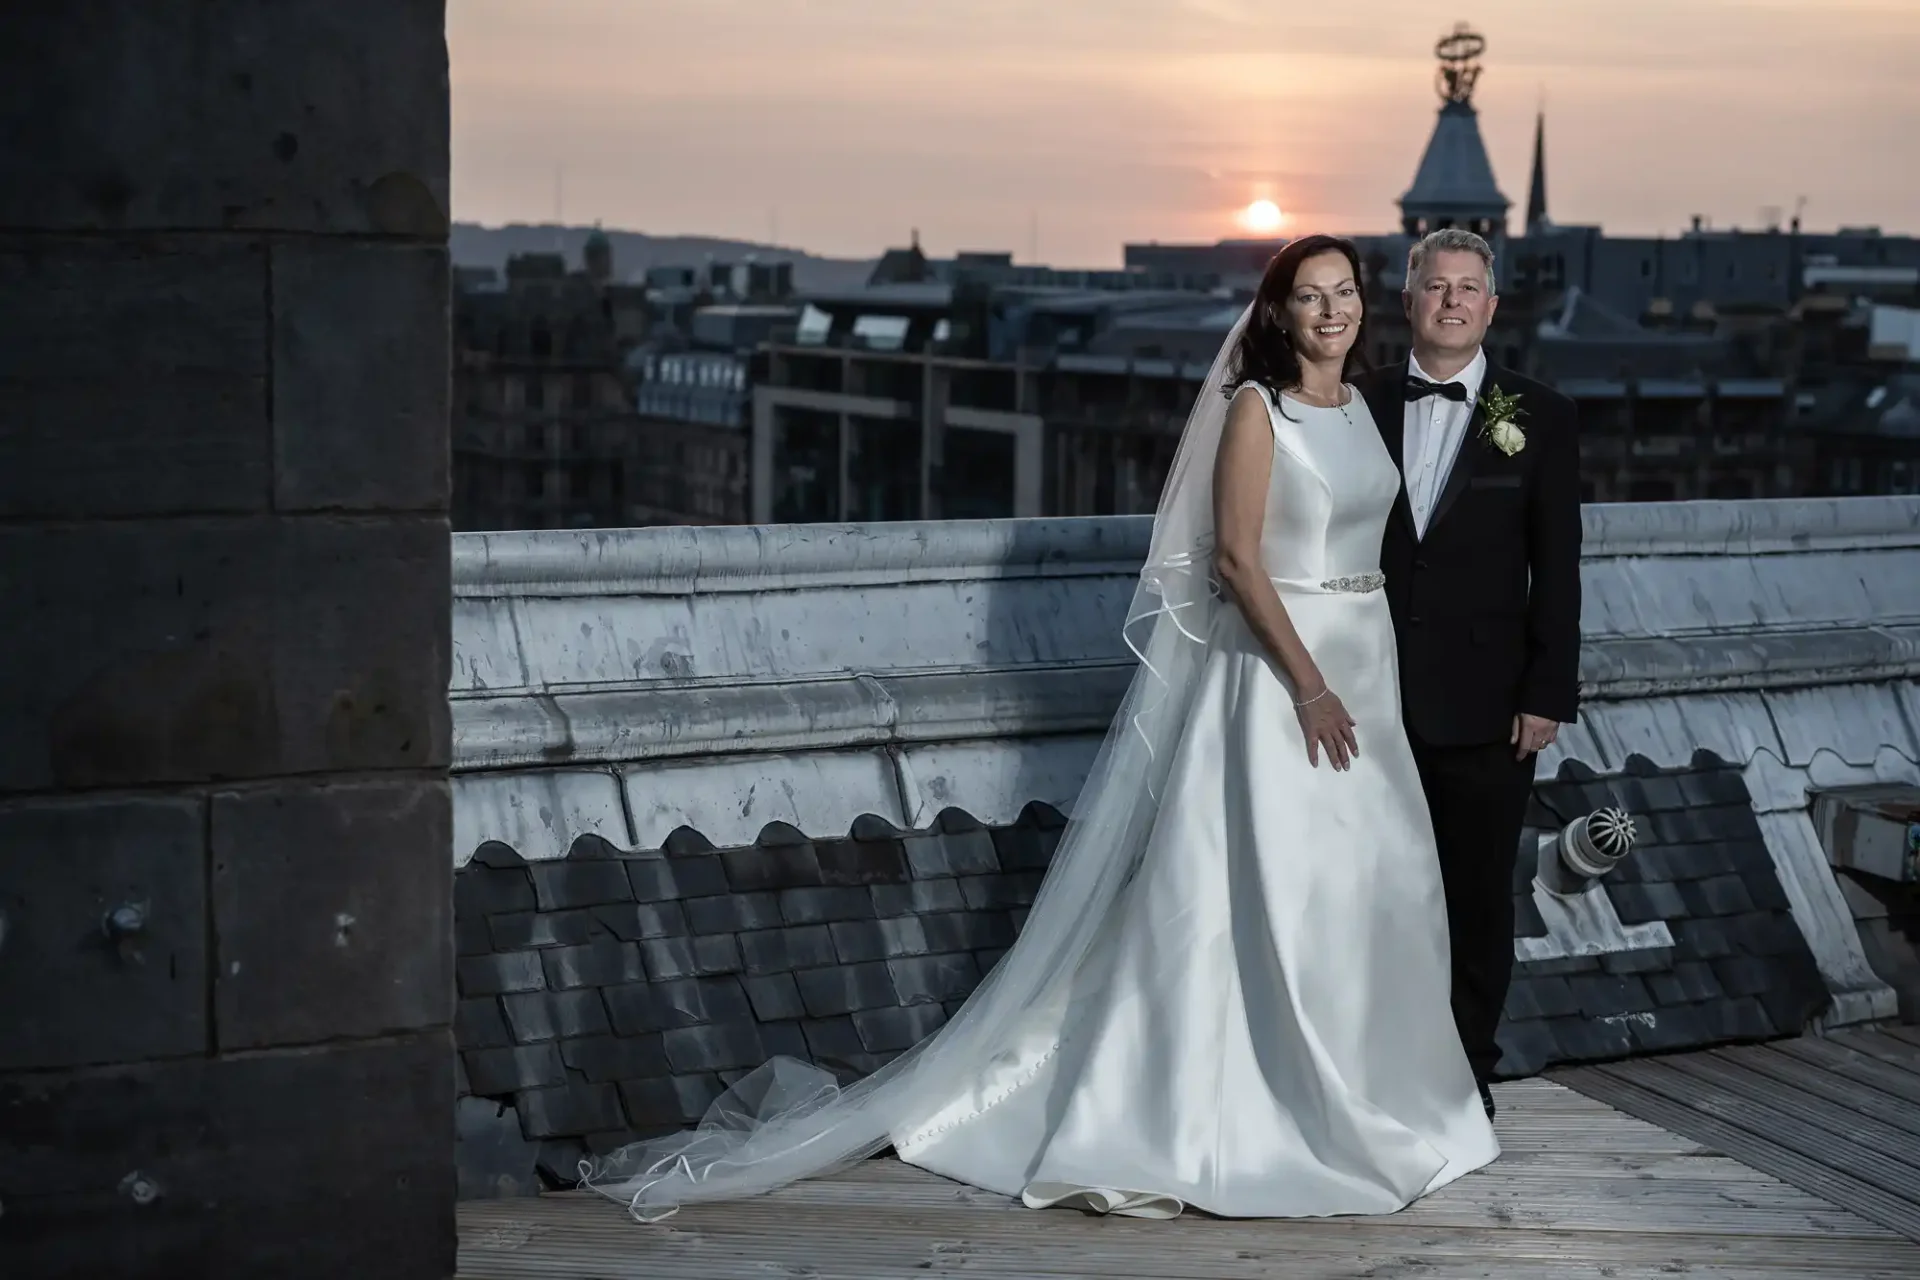 A bride and groom stand on a rooftop at sunset, with city buildings in the background. the bride wears a white dress and the groom a dark suit.